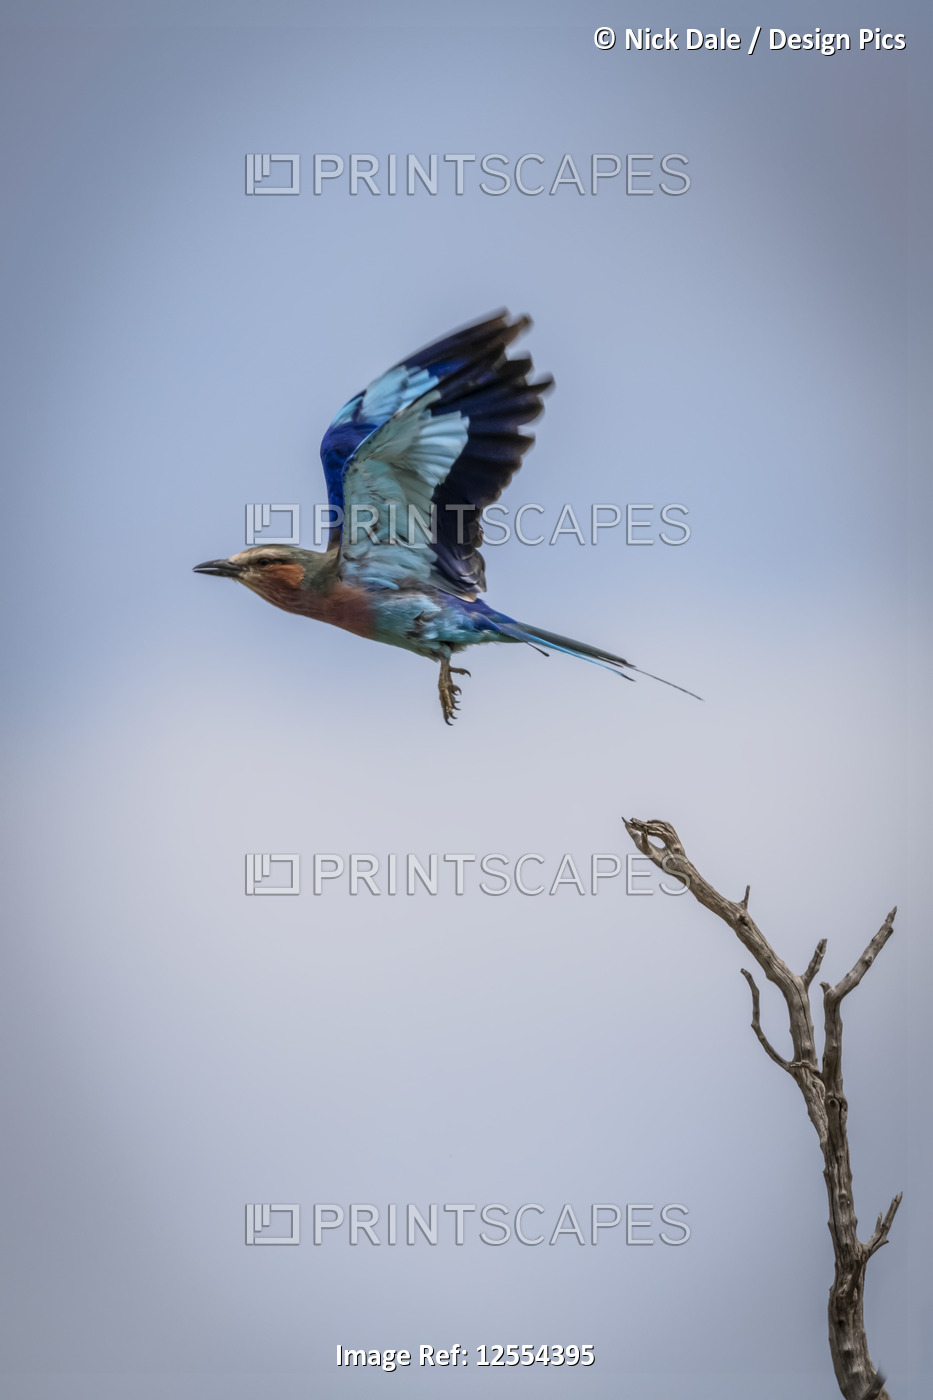 Lilac-breasted roller (Coracias caudatus) flies away from dead branch, ...